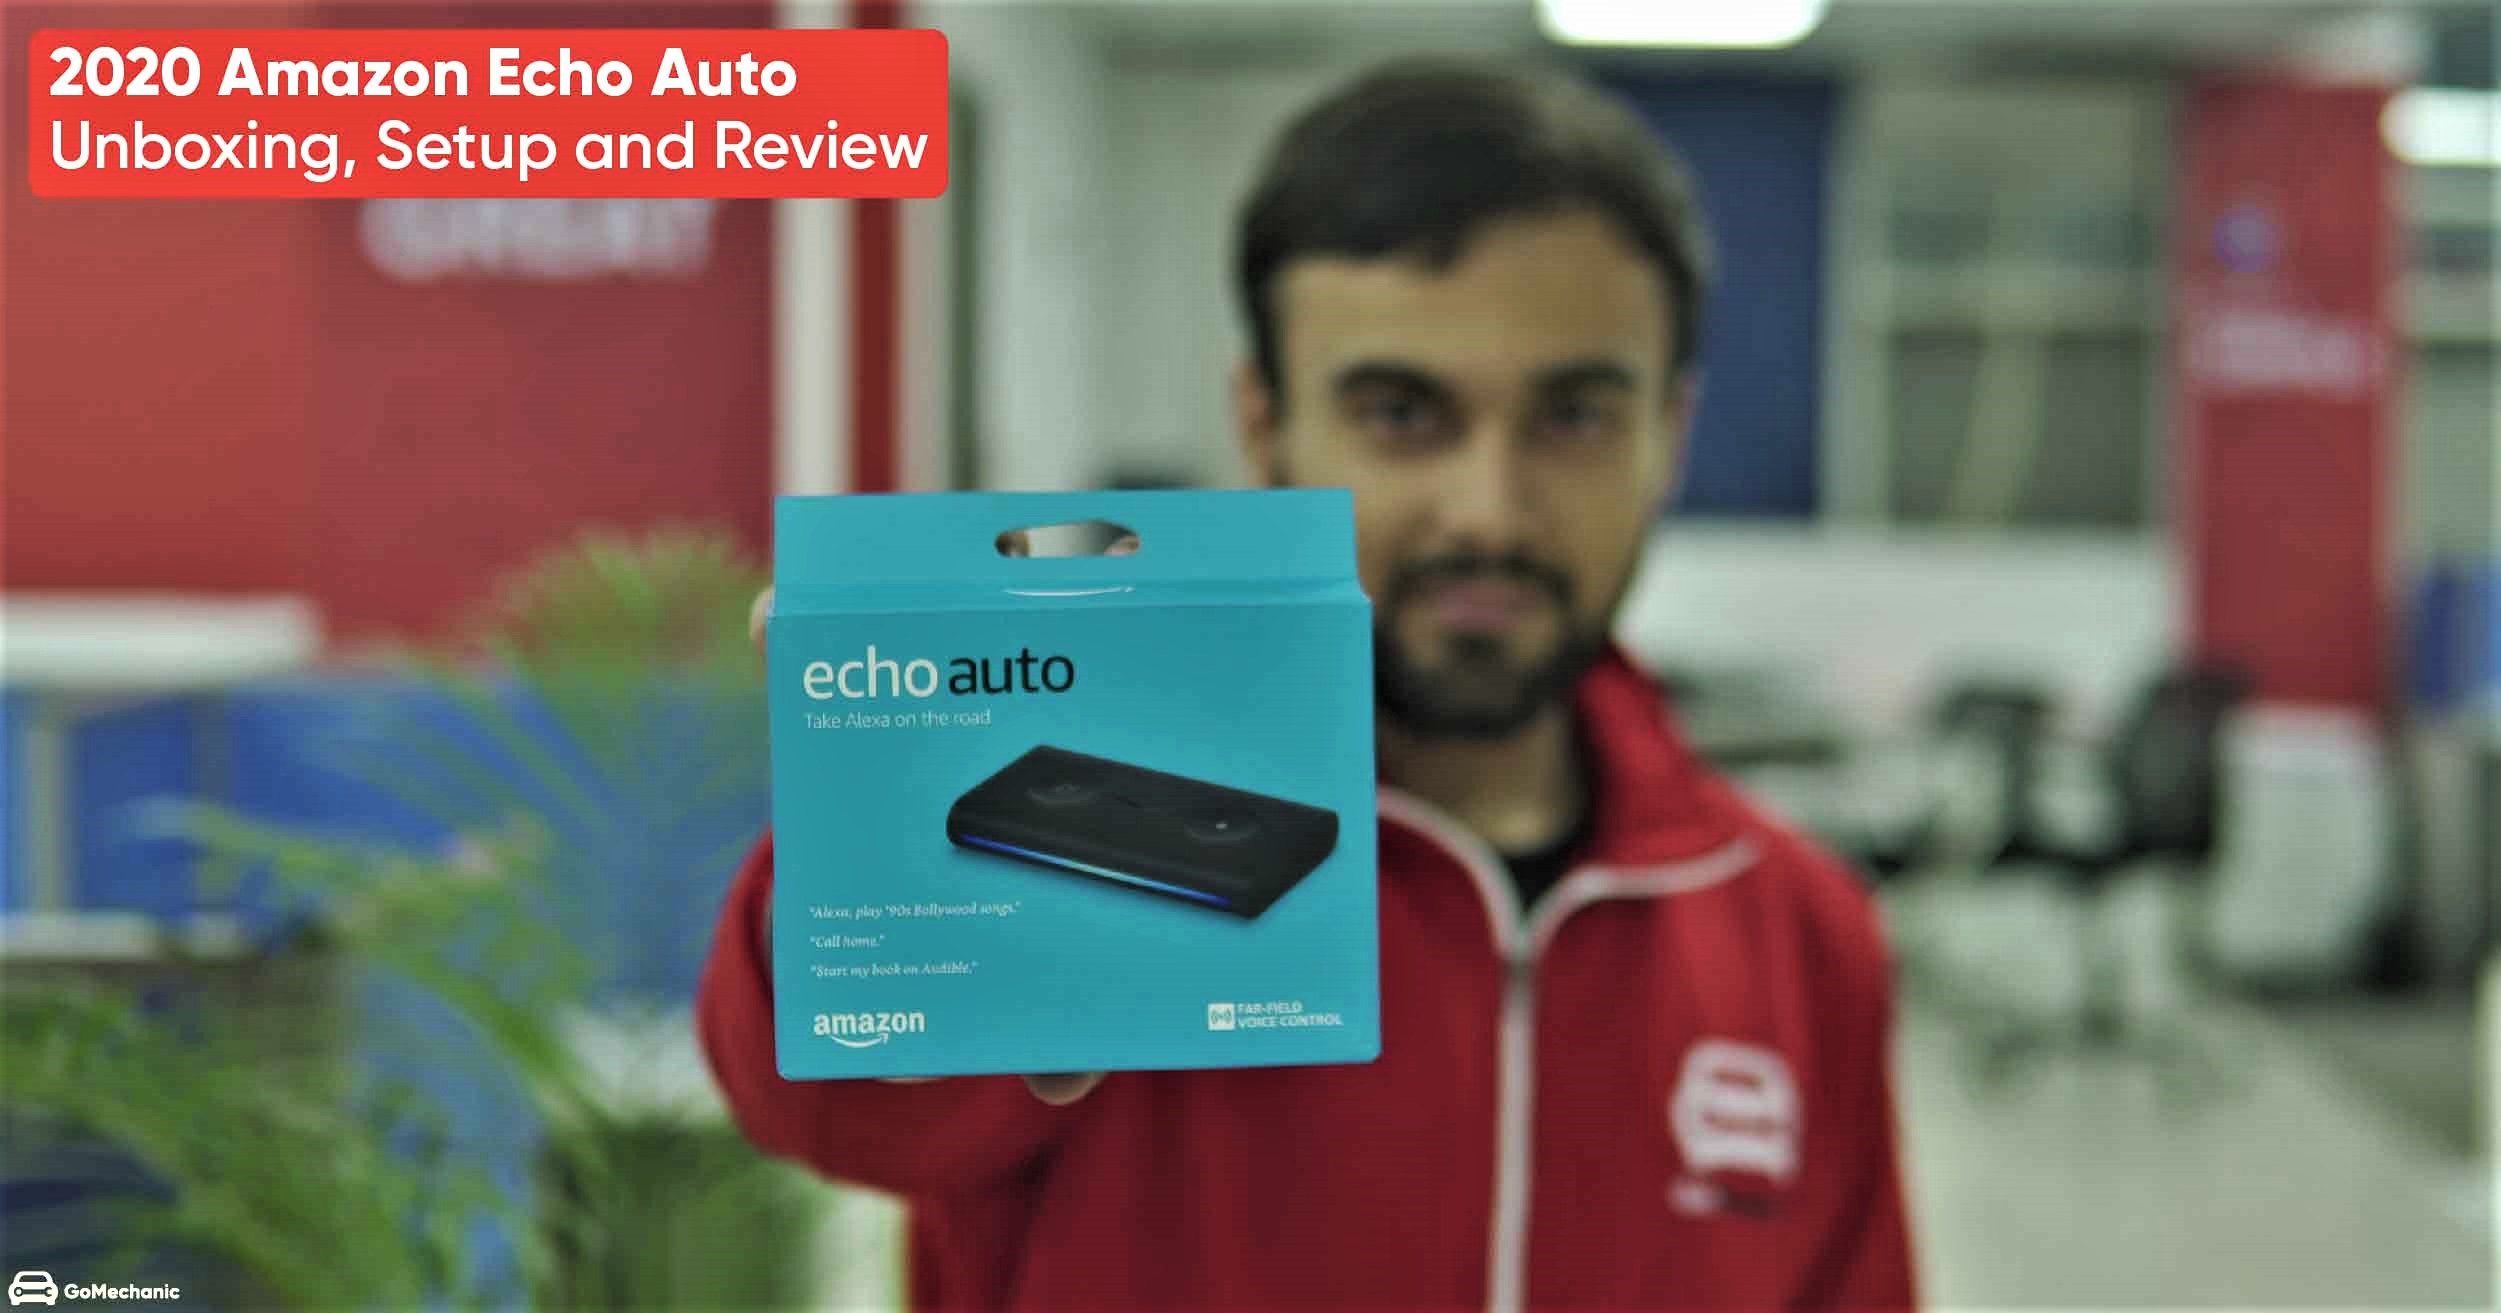 Echo Auto brings Alexa to your old car